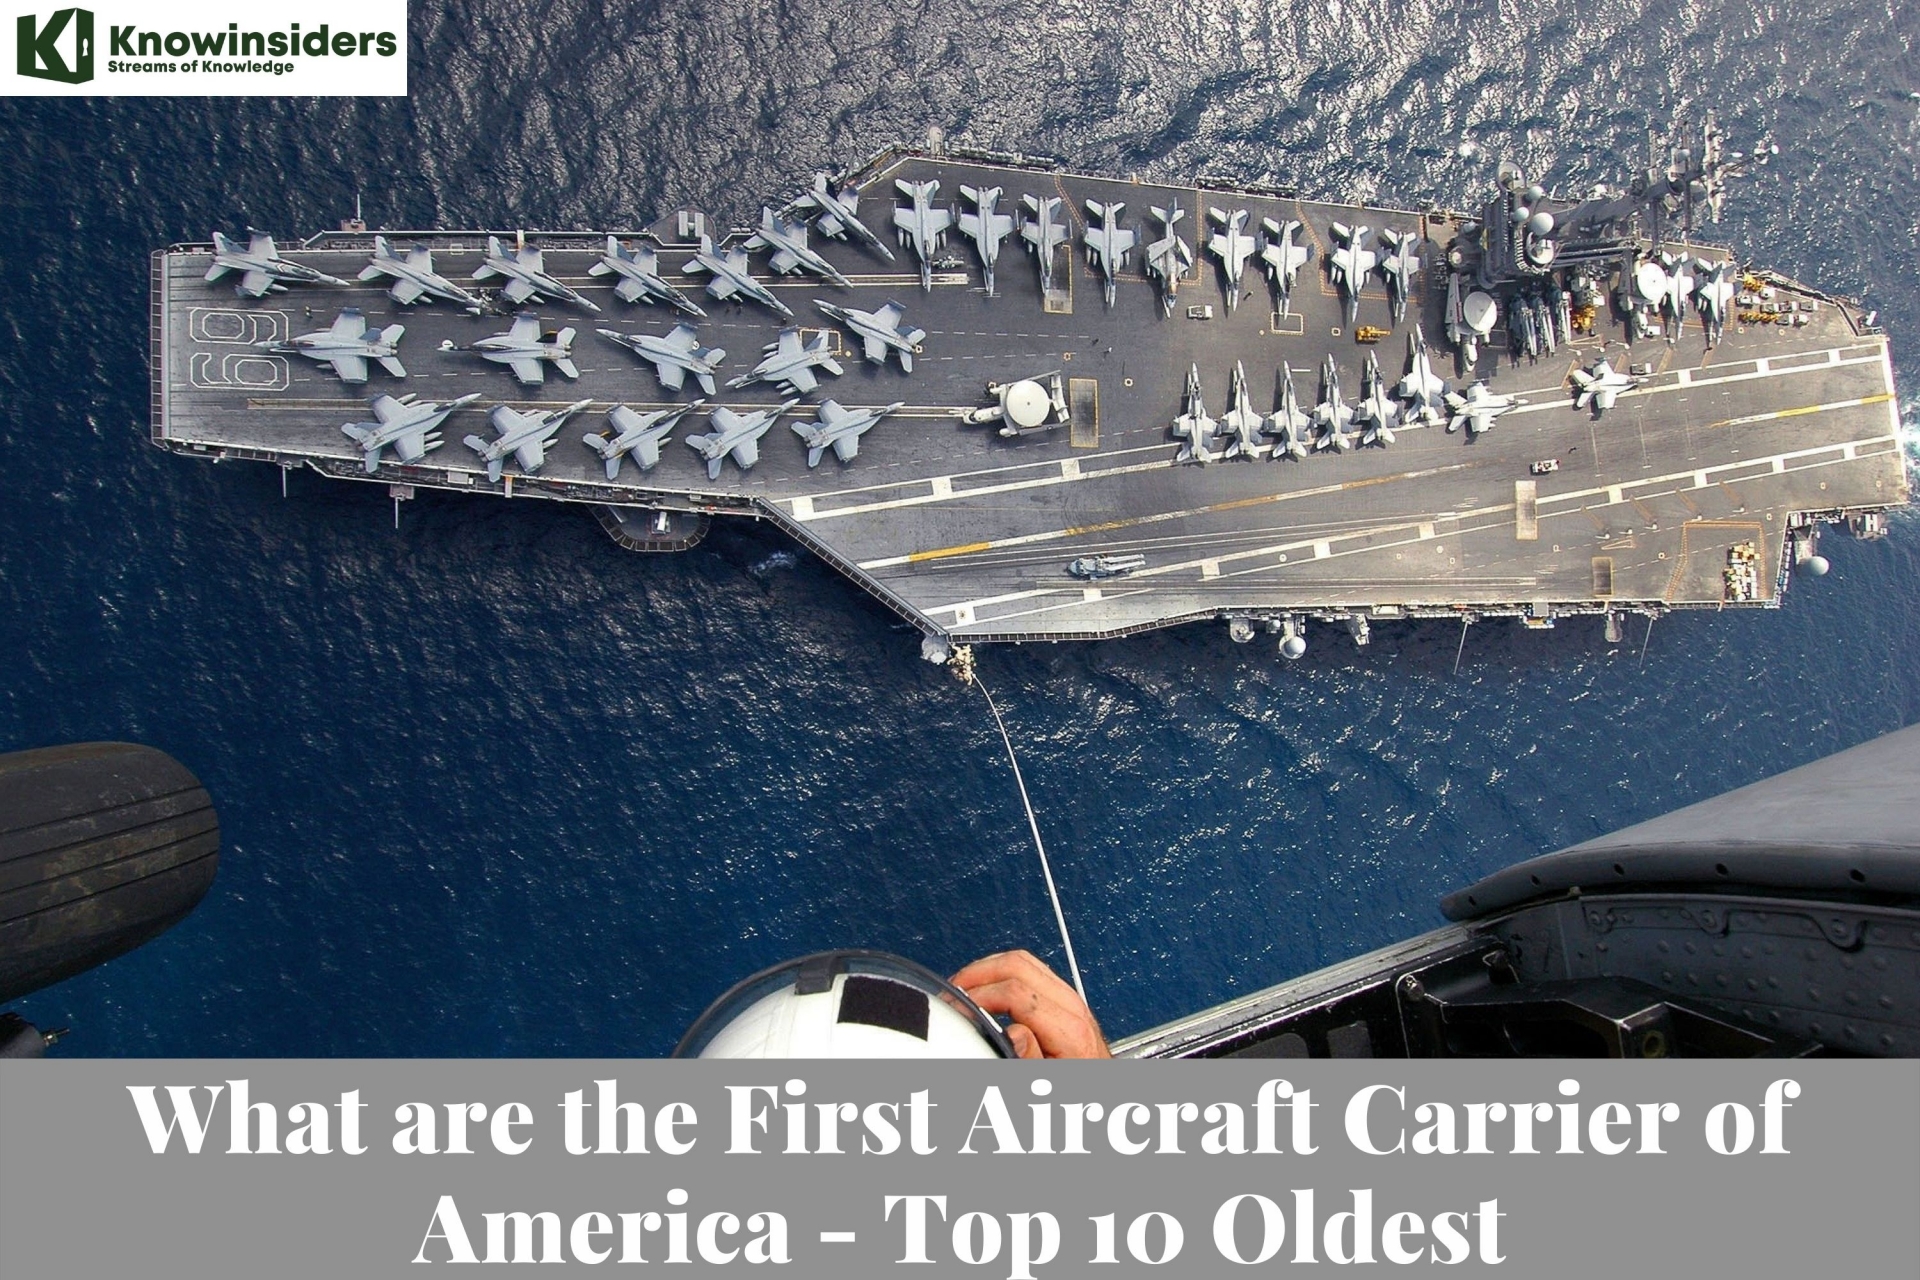 What are the First Aircraft Carrier of America - Top 10 Oldest